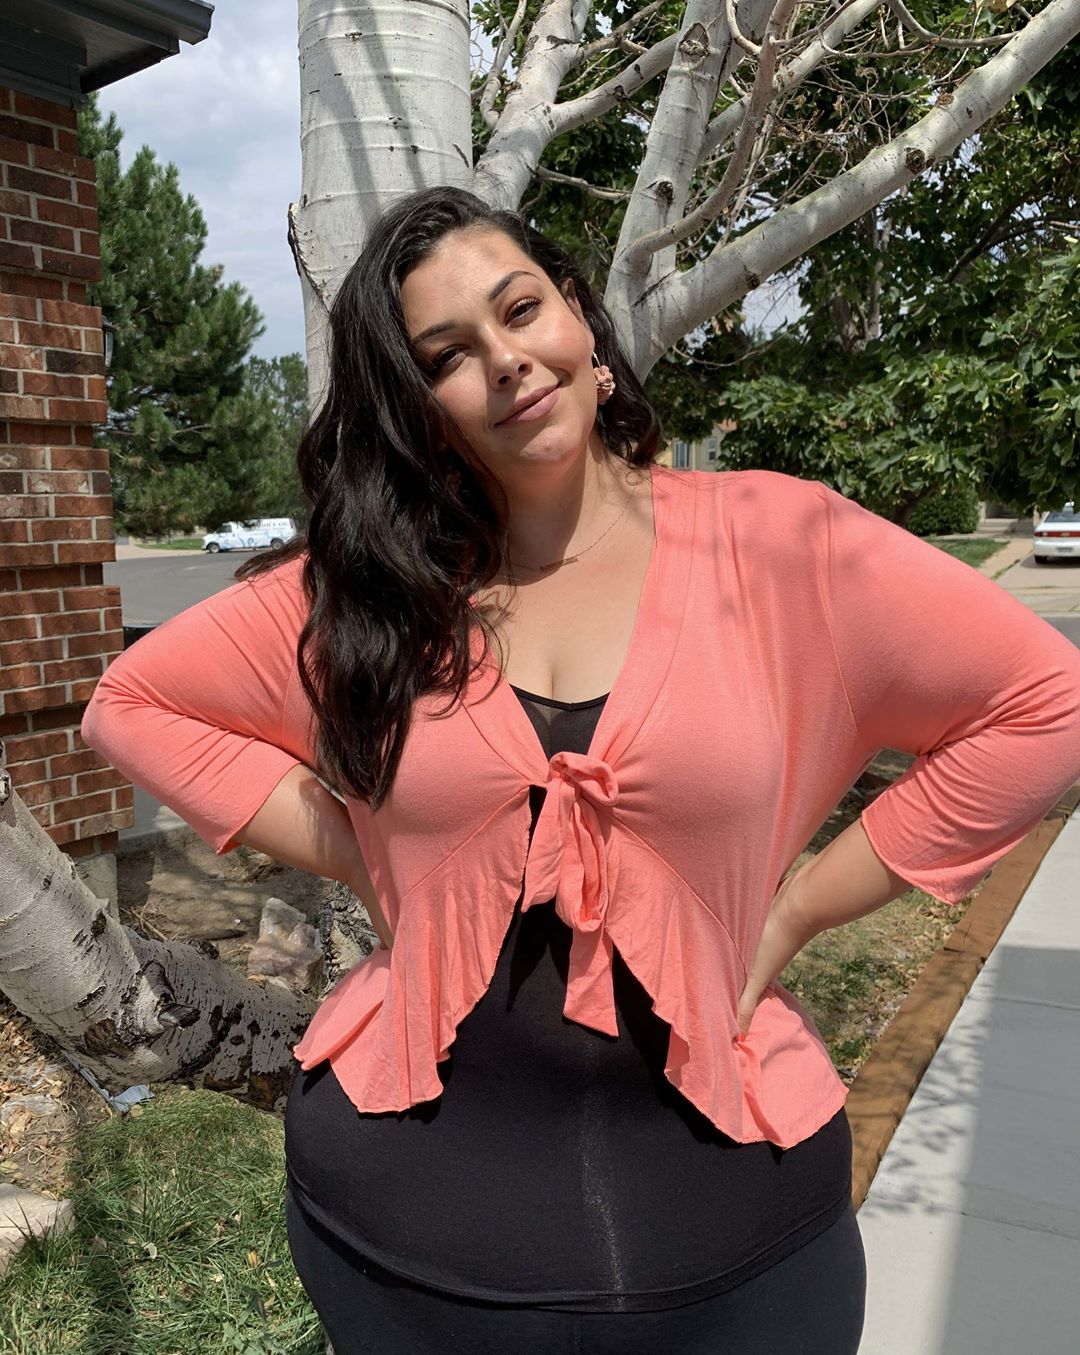 Rosegal - Beautiful Plus Size Top, reviewed by @jivercs⁣
⁣
Shop via the bio link.⁣
Search ID: 468966104⁣
Price: $22.99⁣
Use Code: RGH20 to enjoy 18% off!⁣
#rosegal #plussizefashion #Rosegalcurvygirl #...